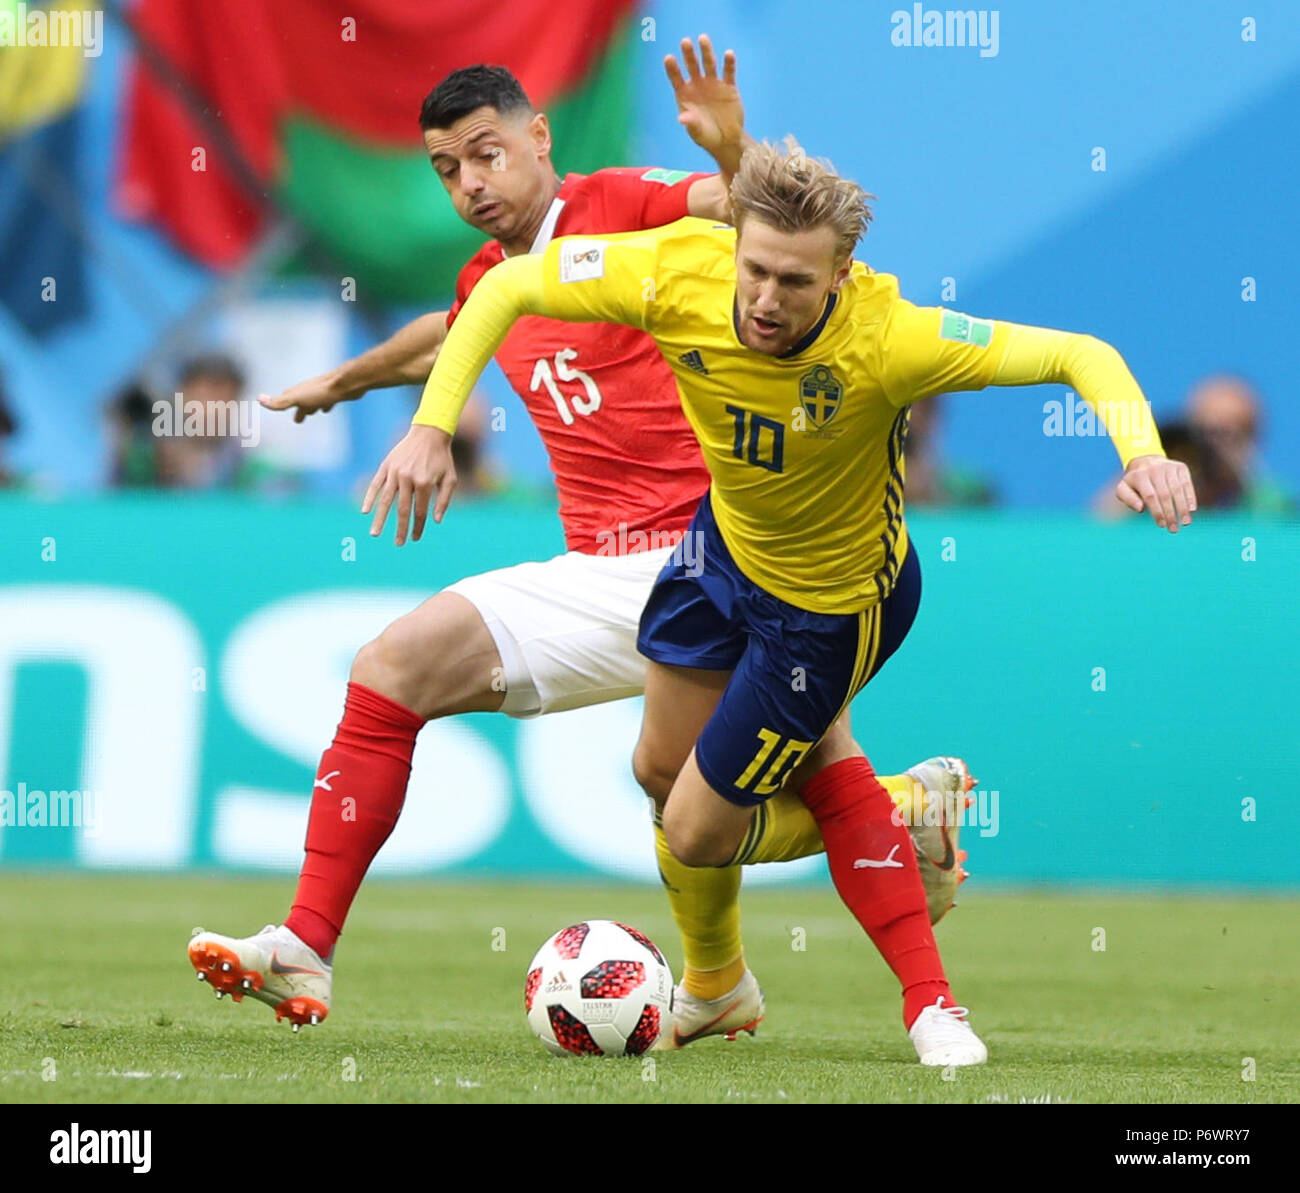 Saint Petersburg, Russia. 3rd July, 2018. Blerim Dzemaili (L) of Switzerland vies with Emil Forsberg of Sweden during the 2018 FIFA World Cup round of 16 match between Switzerland and Sweden in Saint Petersburg, Russia, July 3, 2018. Credit: Xu Zijian/Xinhua/Alamy Live News Stock Photo